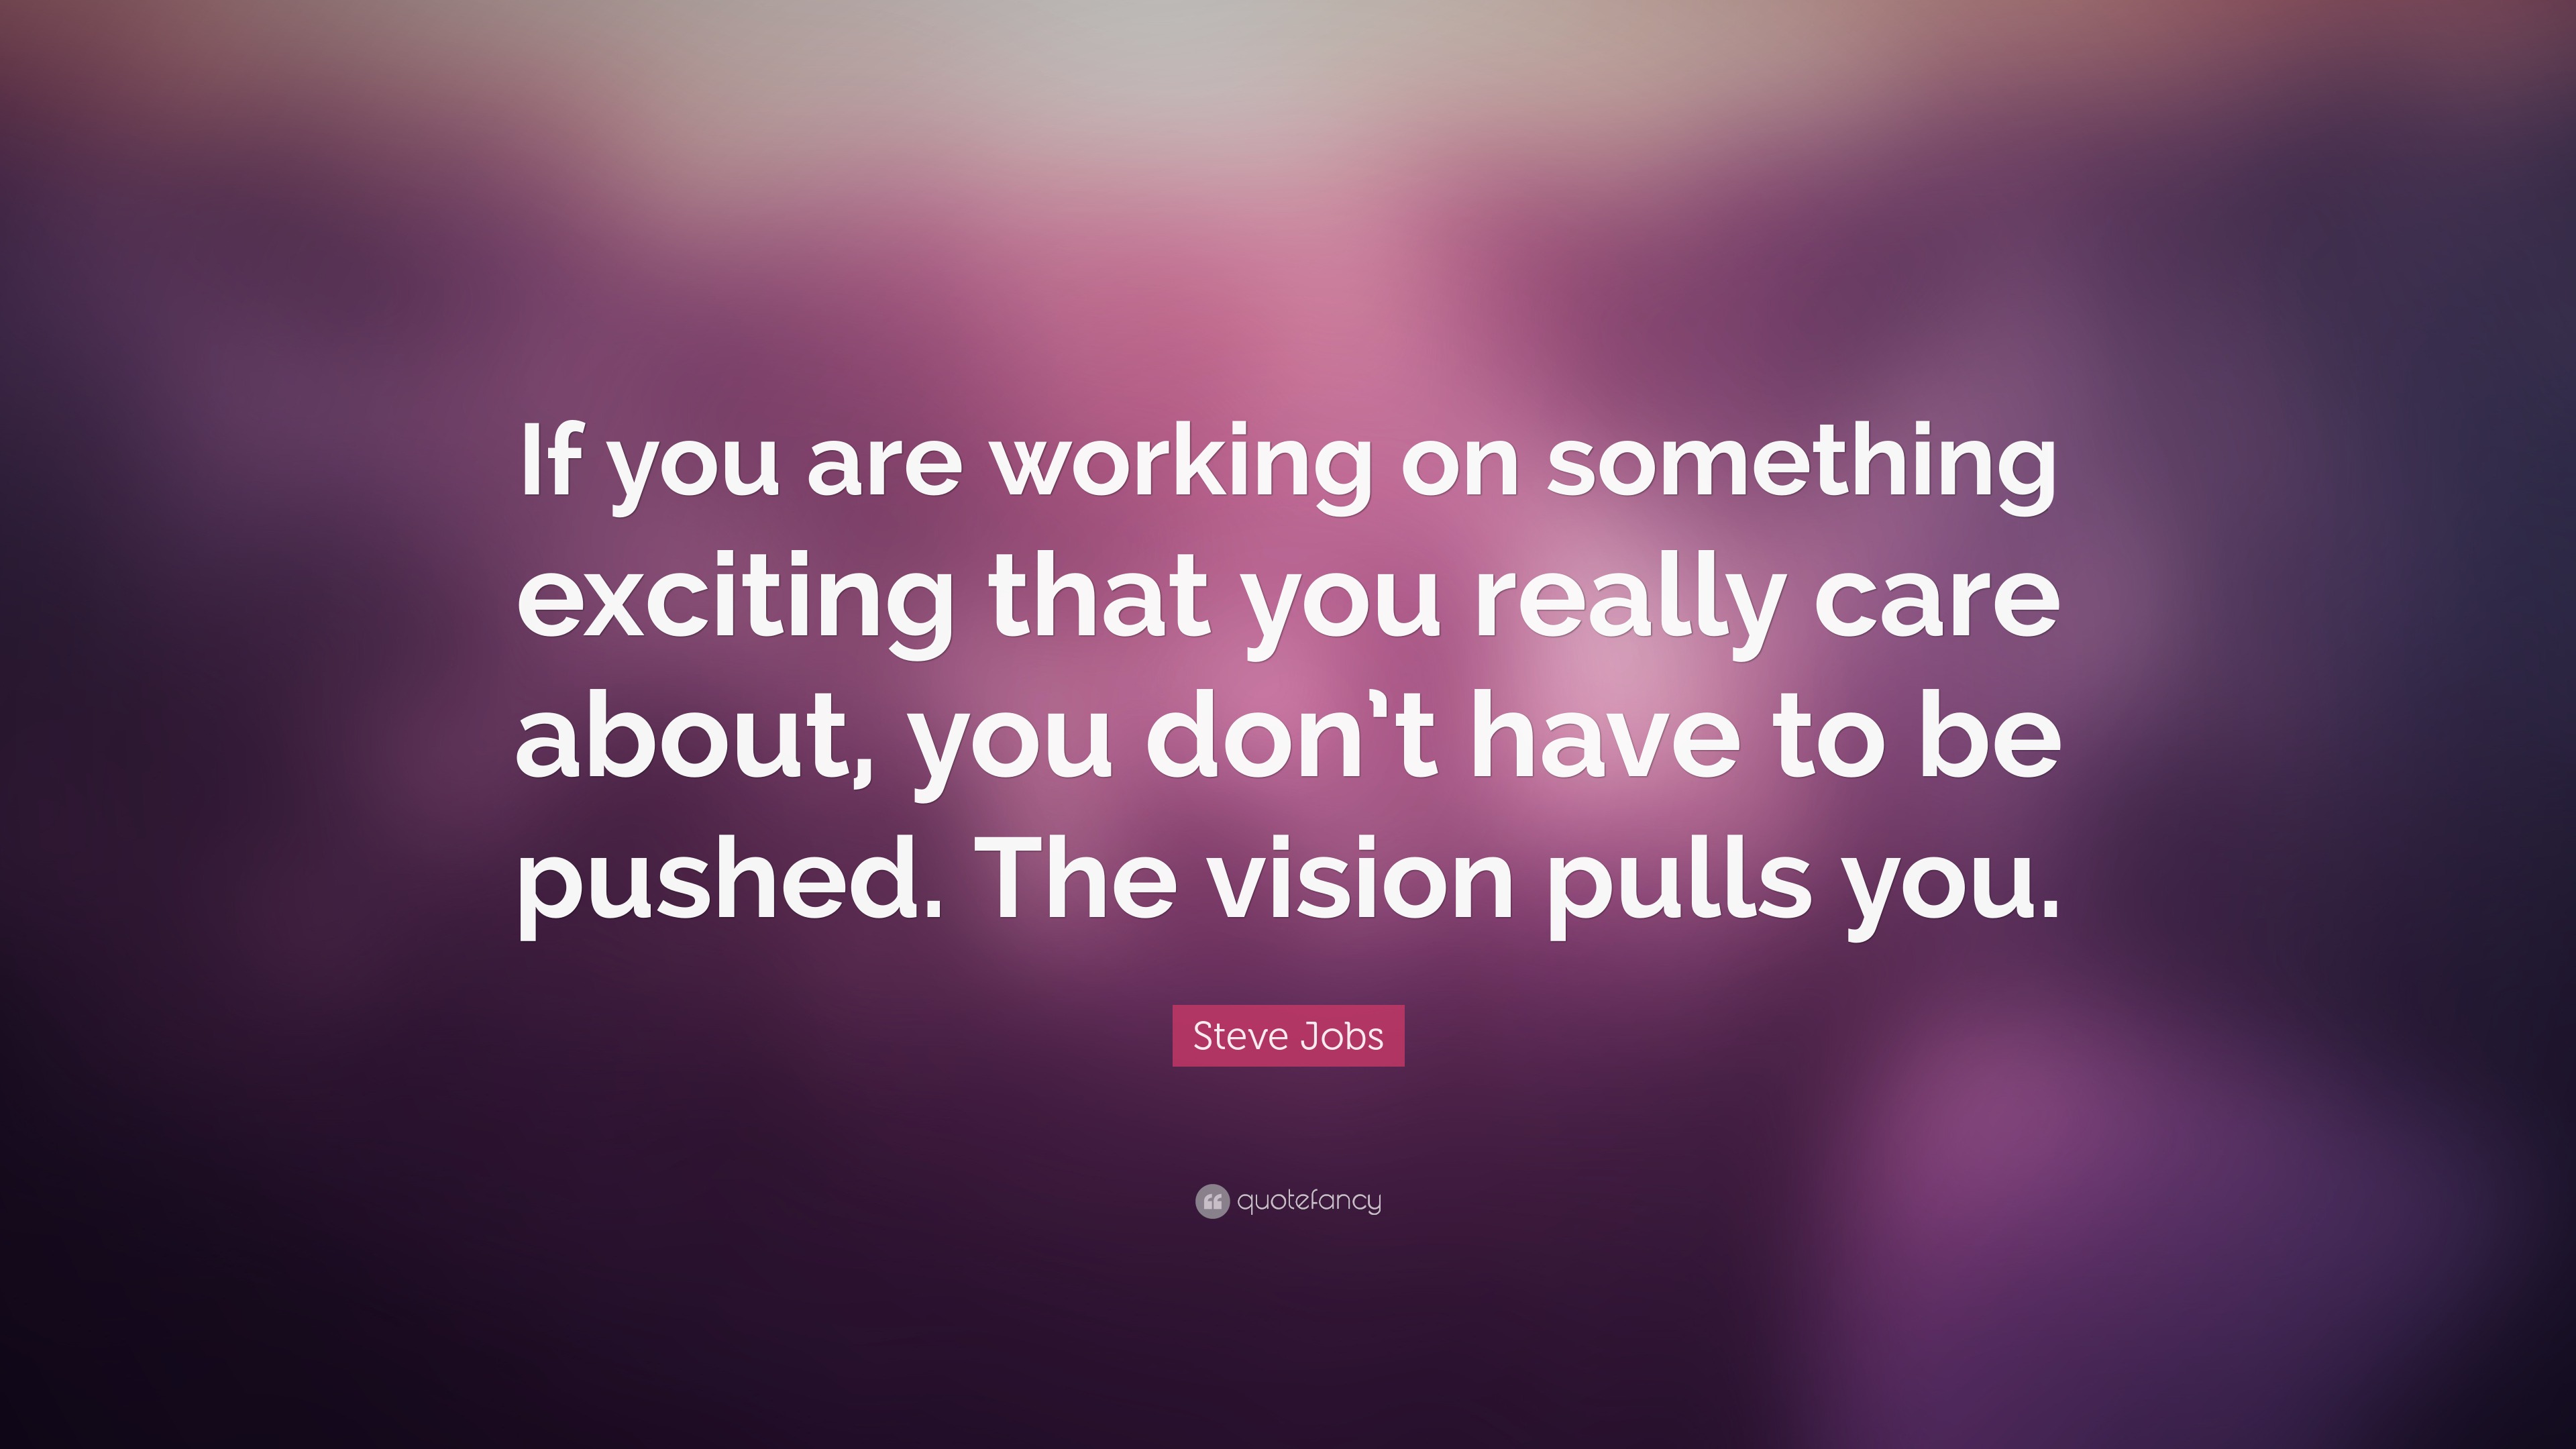 Steve Jobs Quote: “If you are working on something exciting that you ...